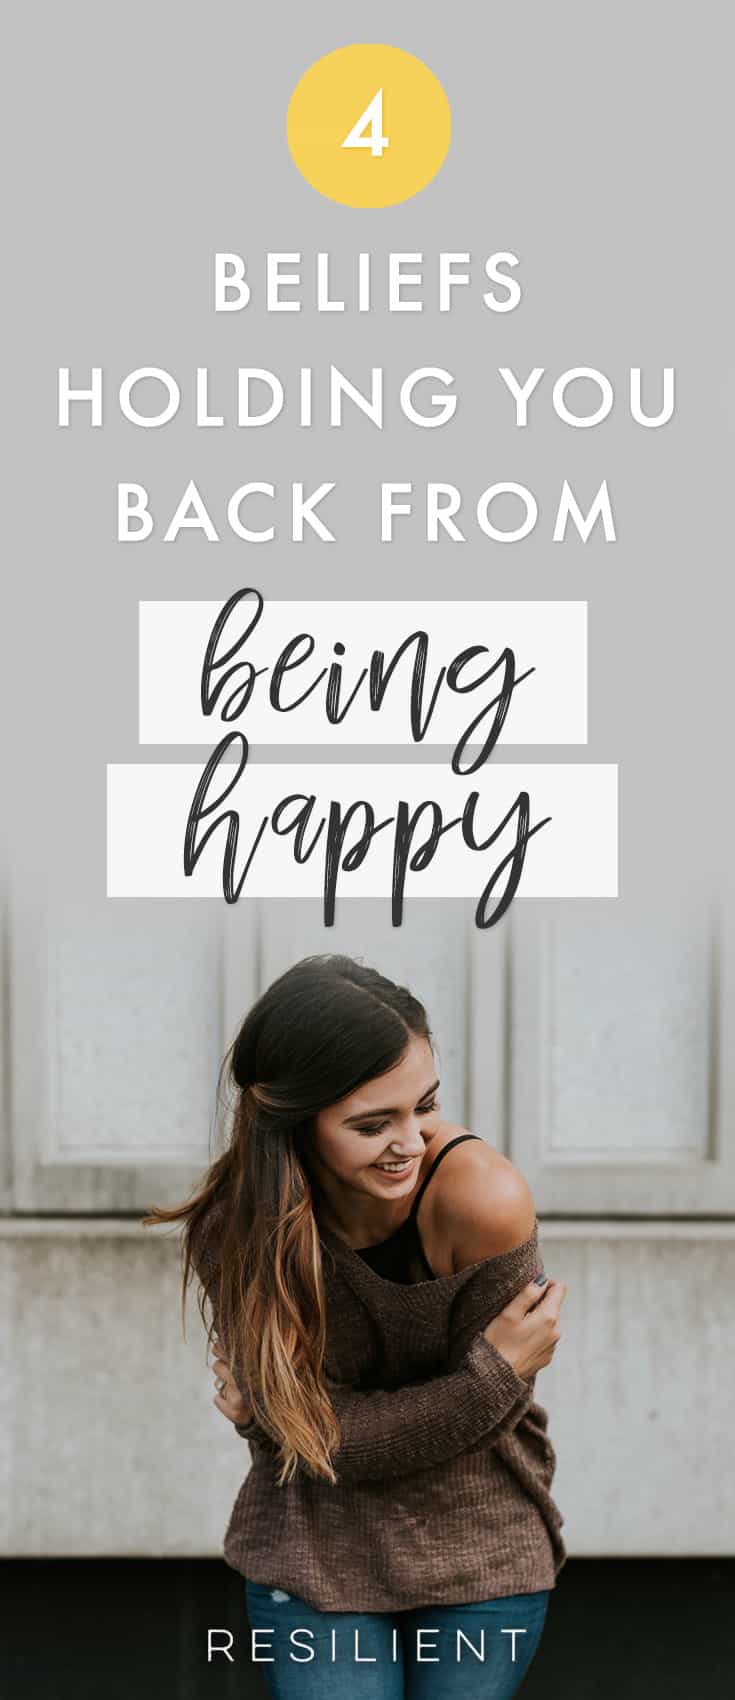 If you're struggling with being unhappy, it's possible that some of your long-held beliefs are actually getting in the way. Here are 4 beliefs holding you back from being happy.